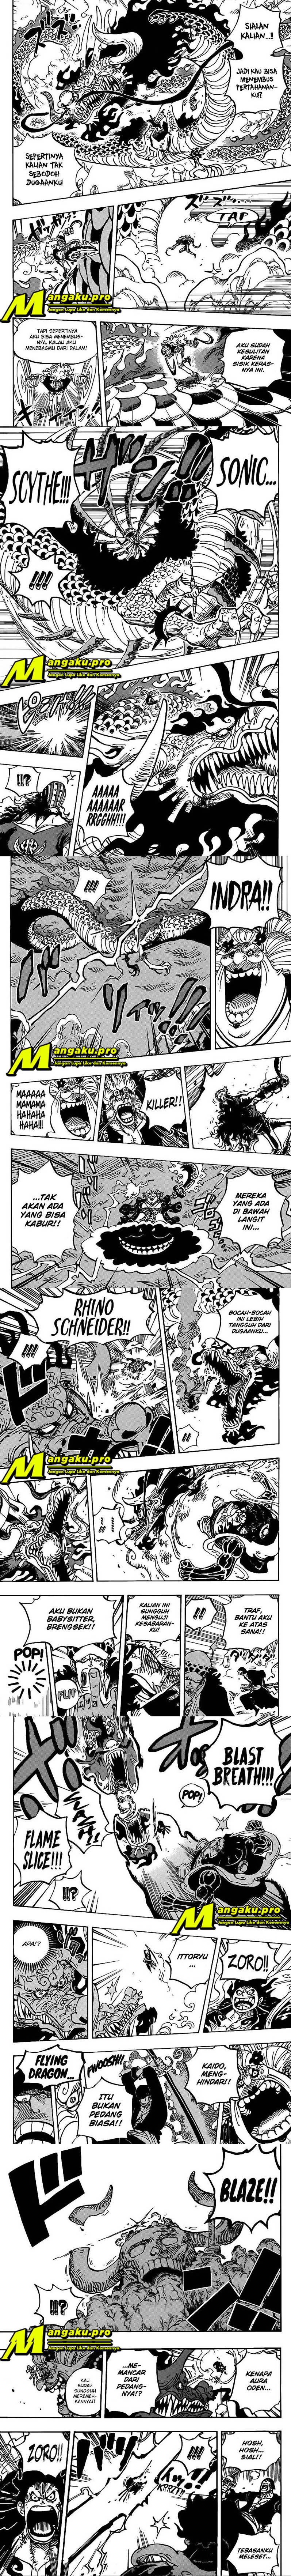 One Piece Chapter 1002